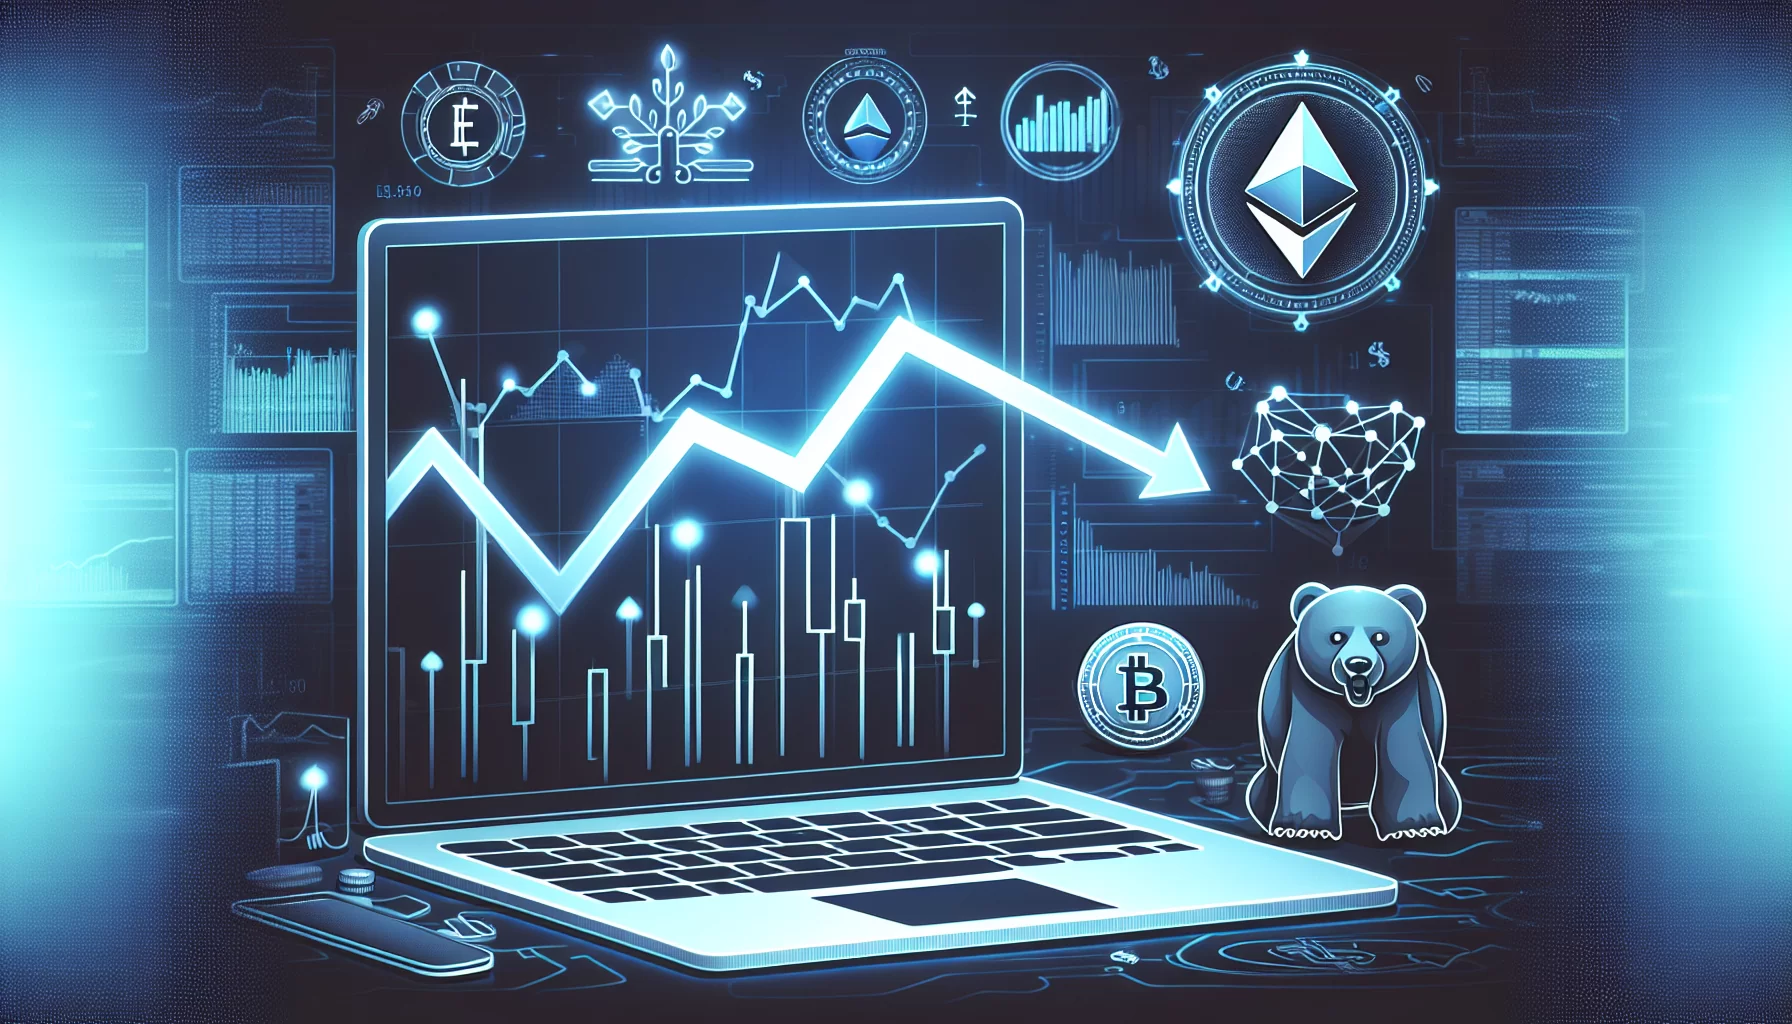 Analysis of Ethereum: price trends suggest ETH's downside may not be over